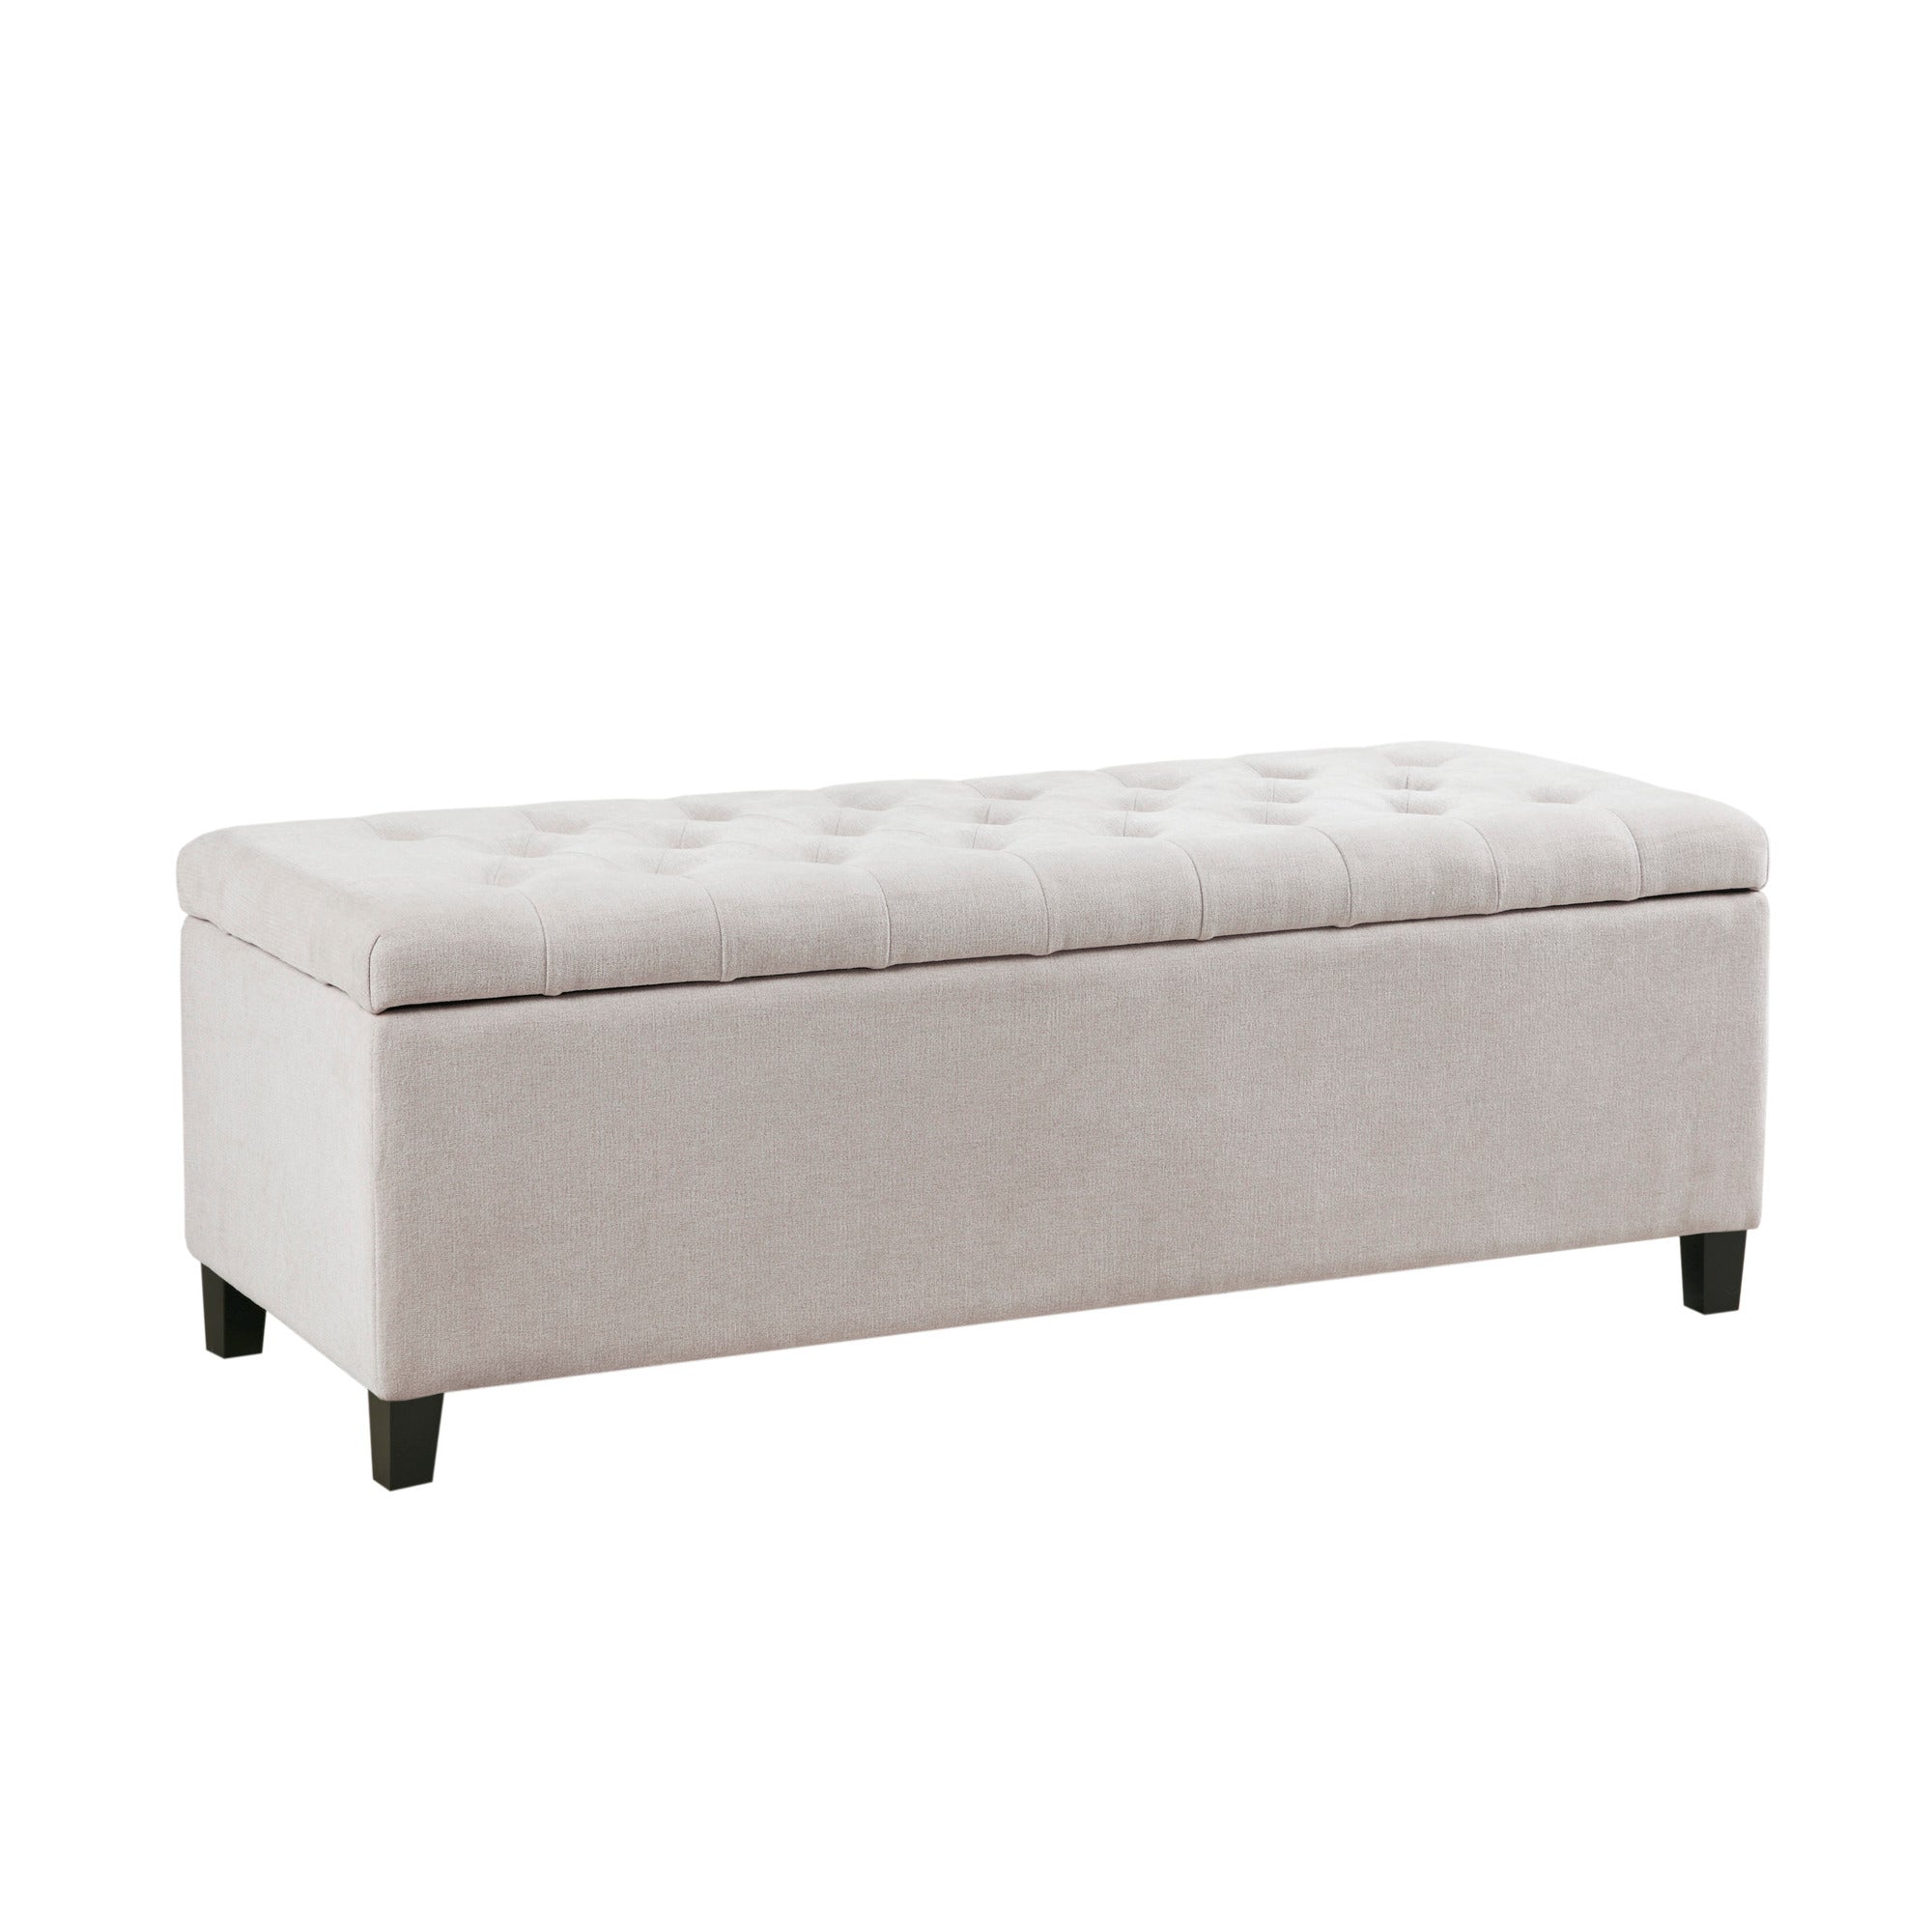 Tufted Top Soft Close Storage Bench natural-polyester